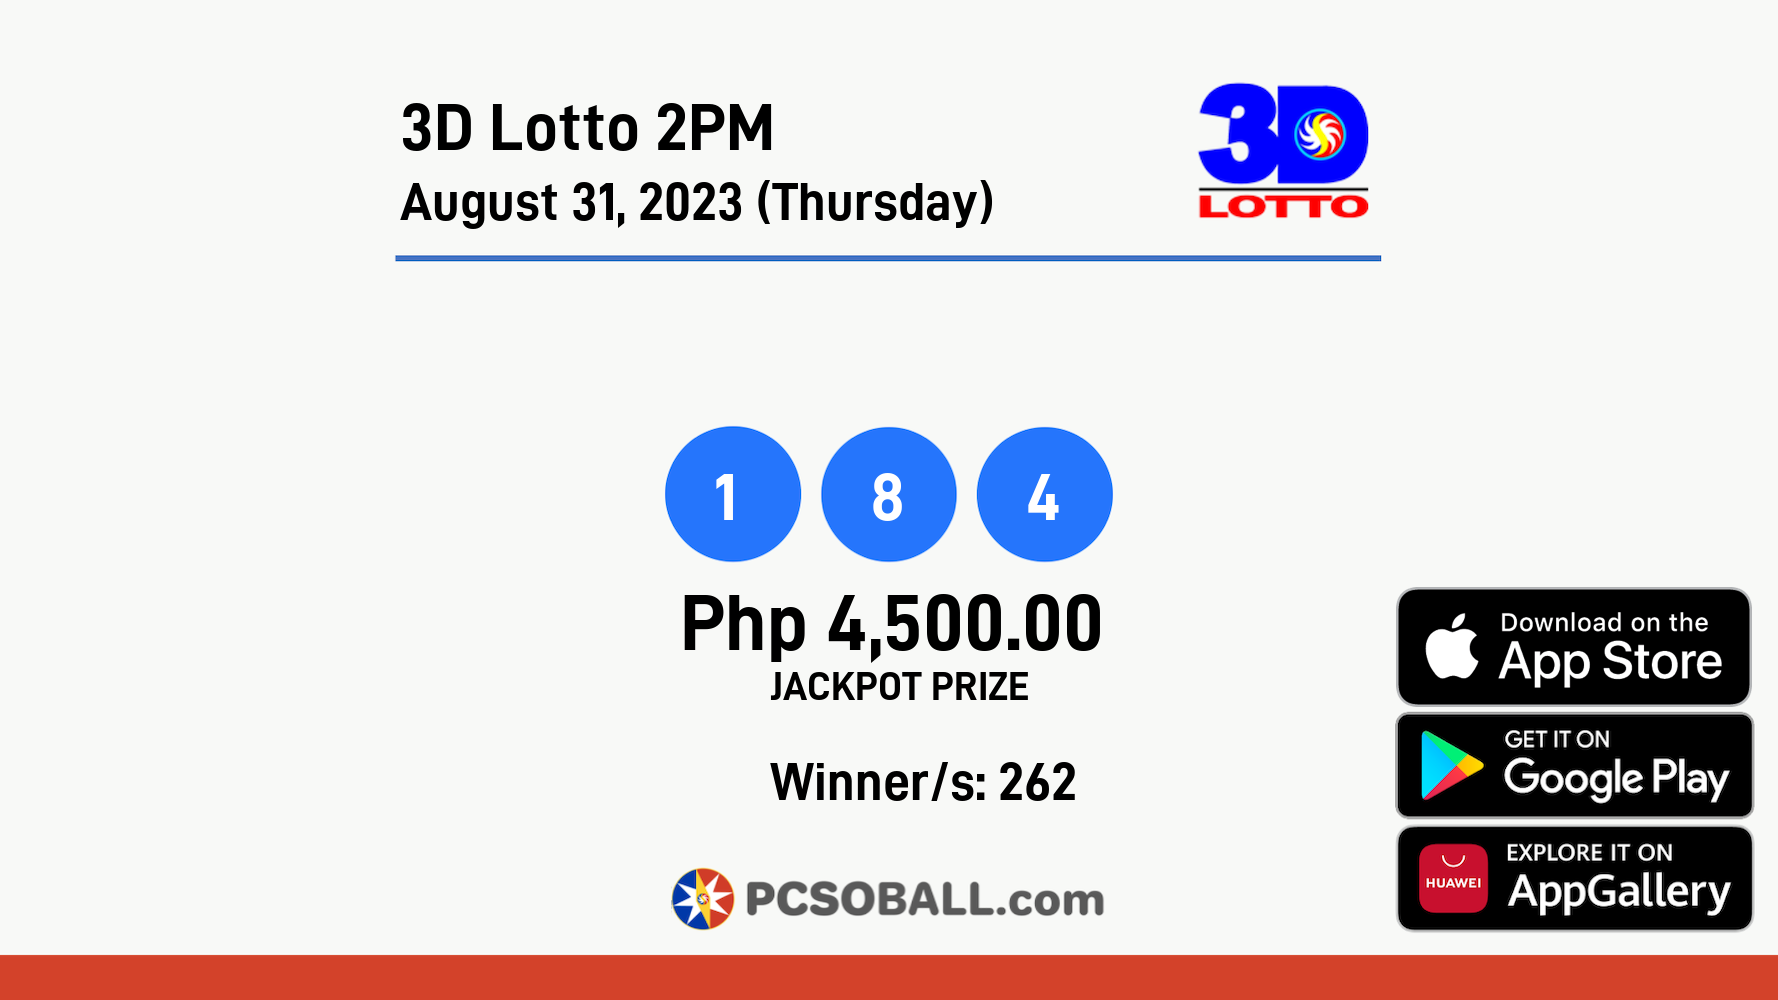 3D Lotto 2PM August 31, 2023 (Thursday) Result